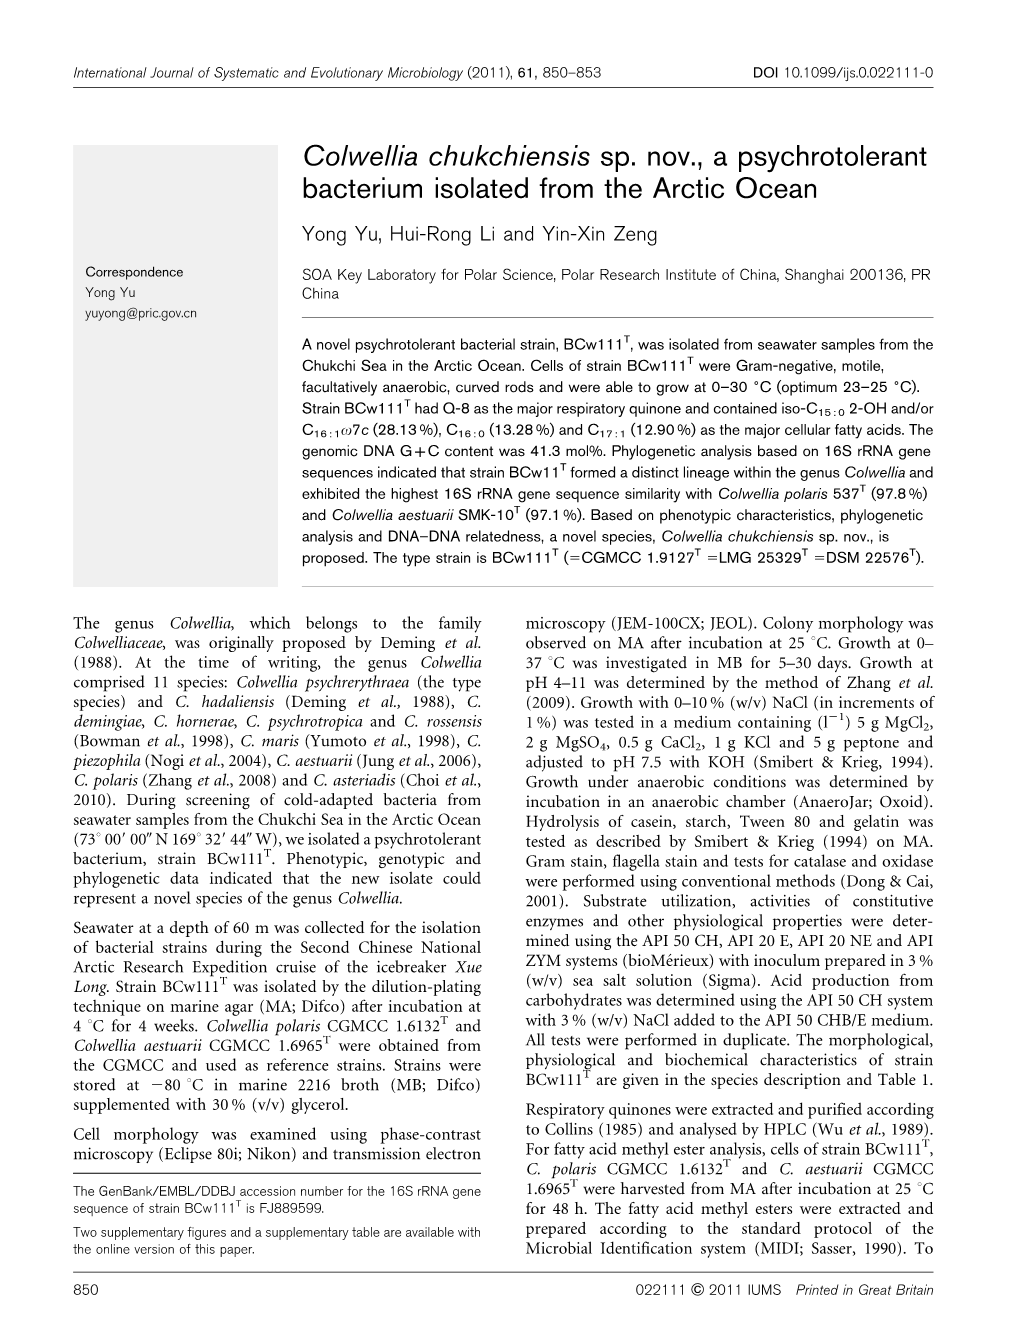 Colwellia Chukchiensis Sp. Nov., a Psychrotolerant Bacterium Isolated from the Arctic Ocean